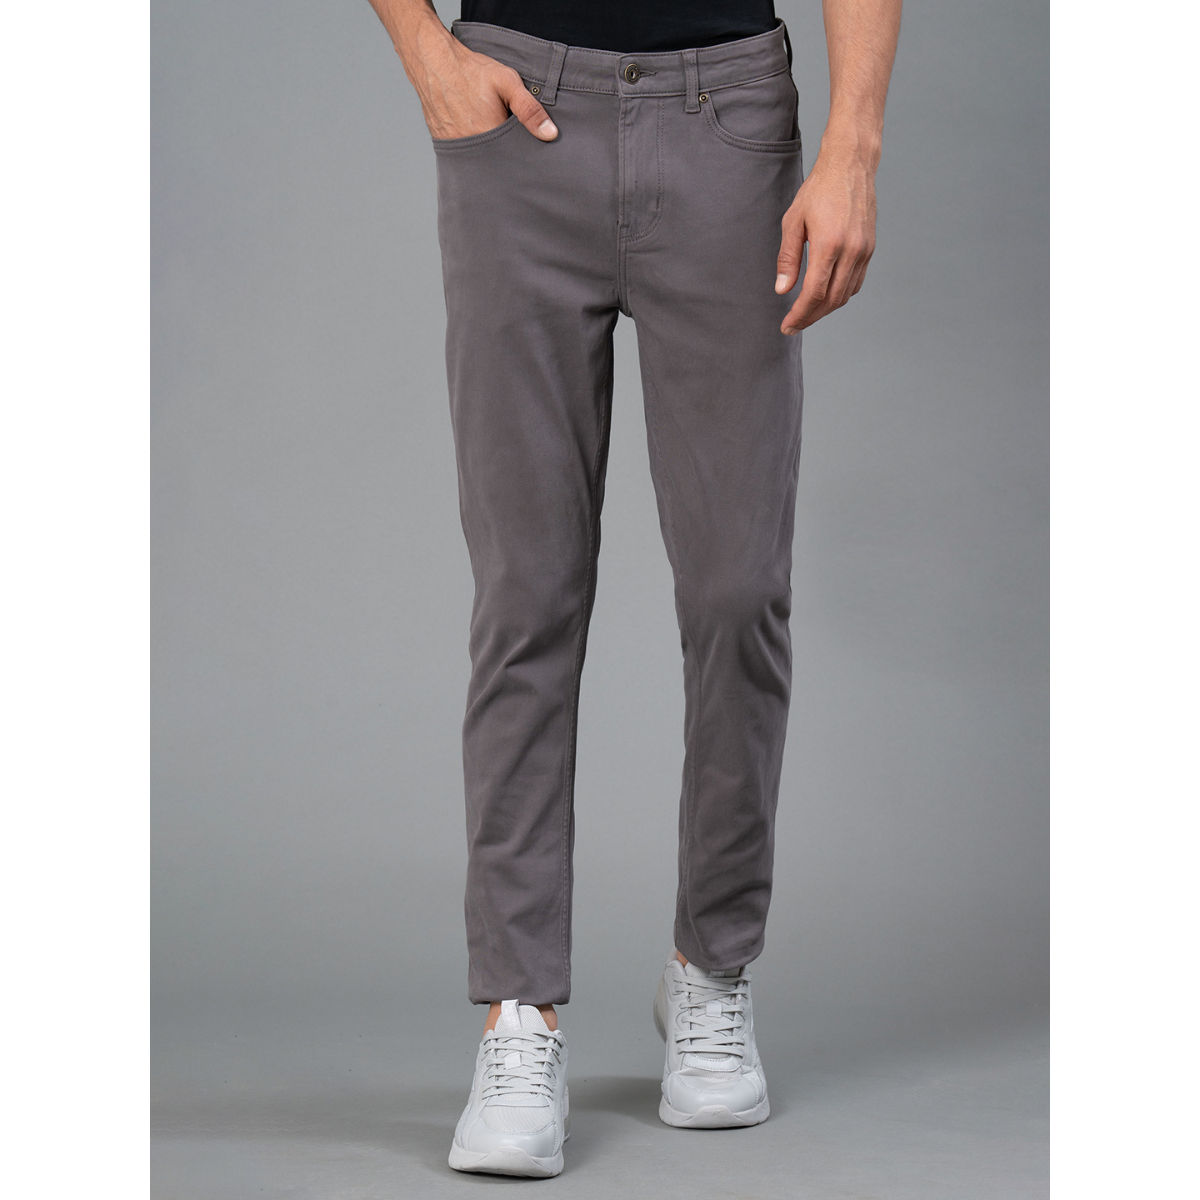 Buy Grey Jeans for Men by RED TAPE Online | Ajio.com